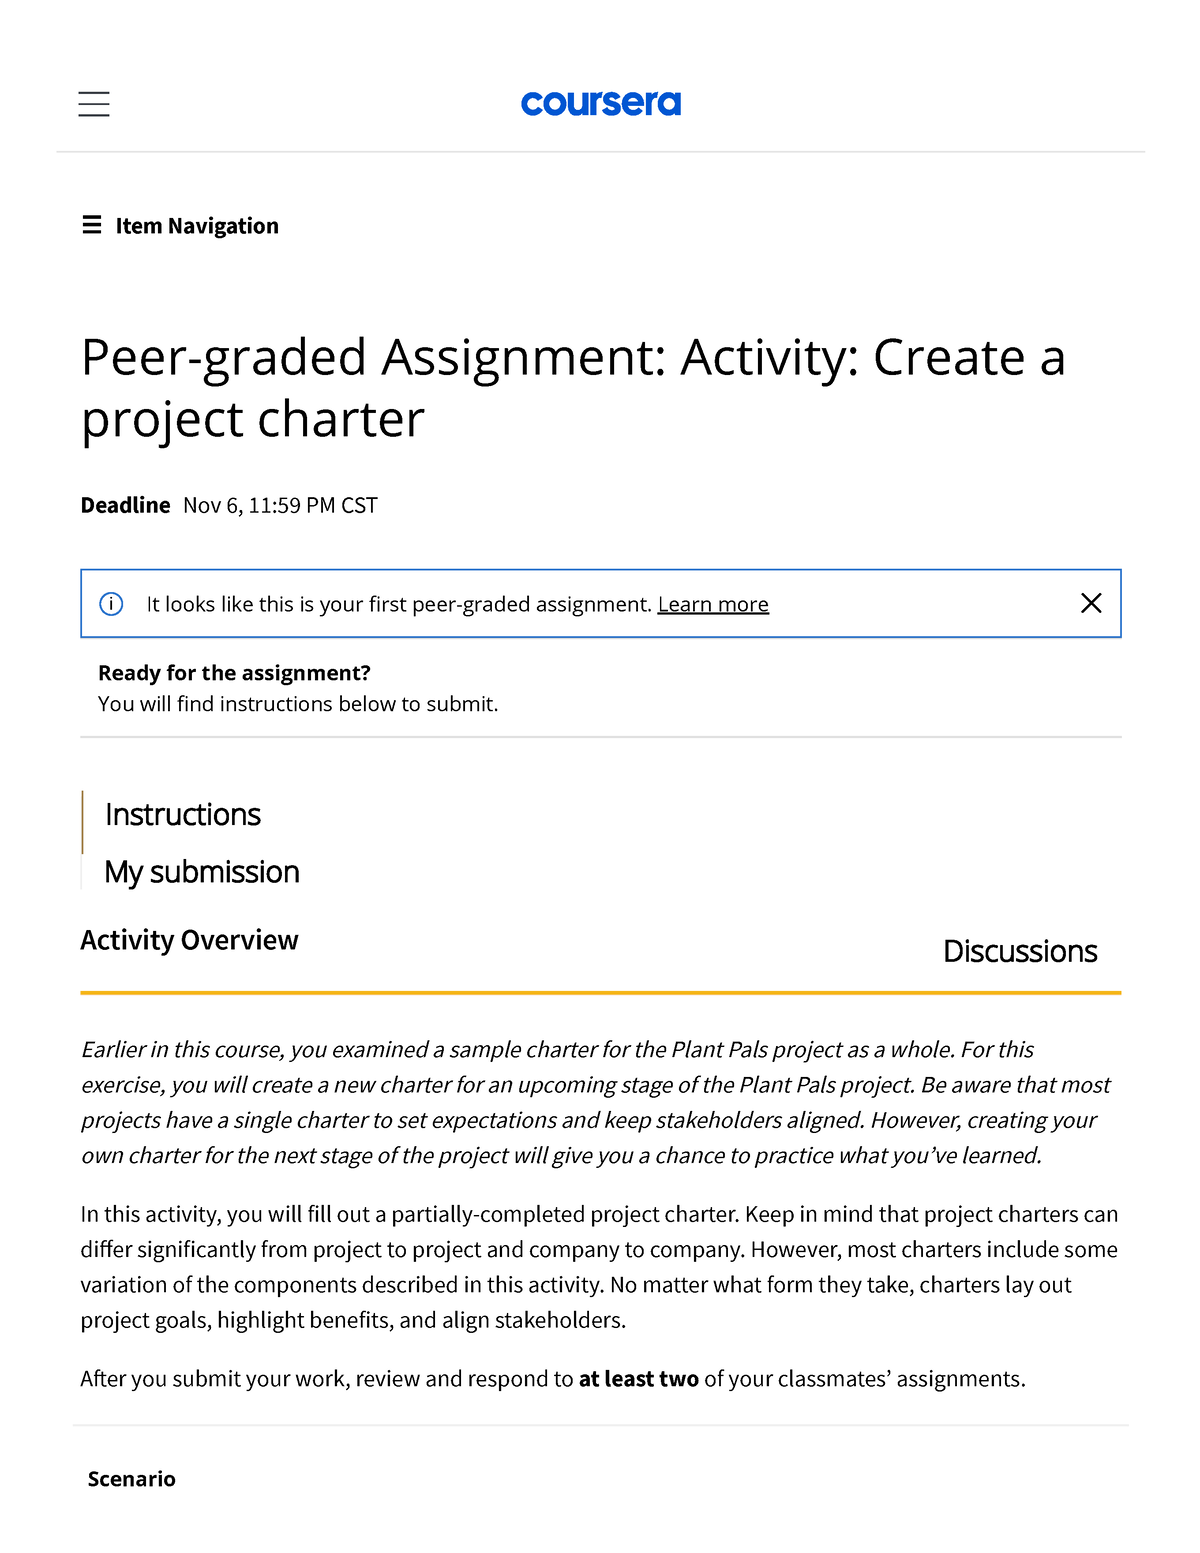 what is peer graded assignment in coursera